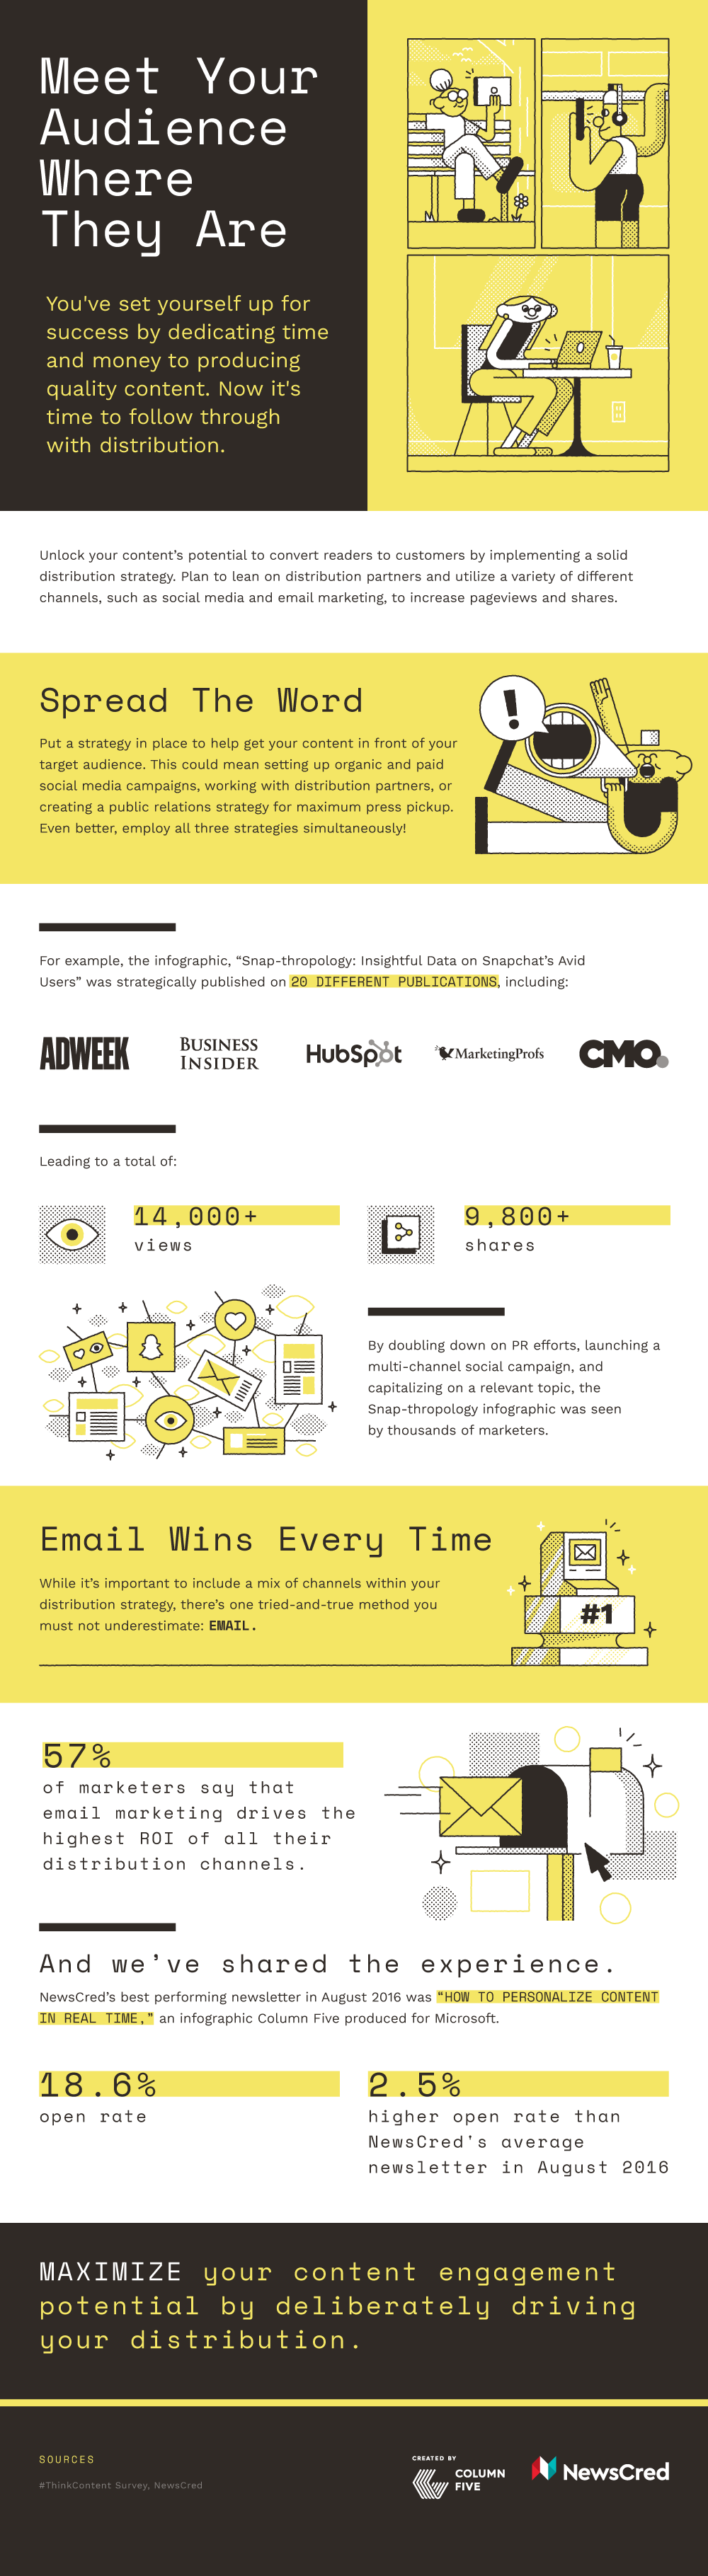 How to Maximize Content Marketing Distribution - #infographic